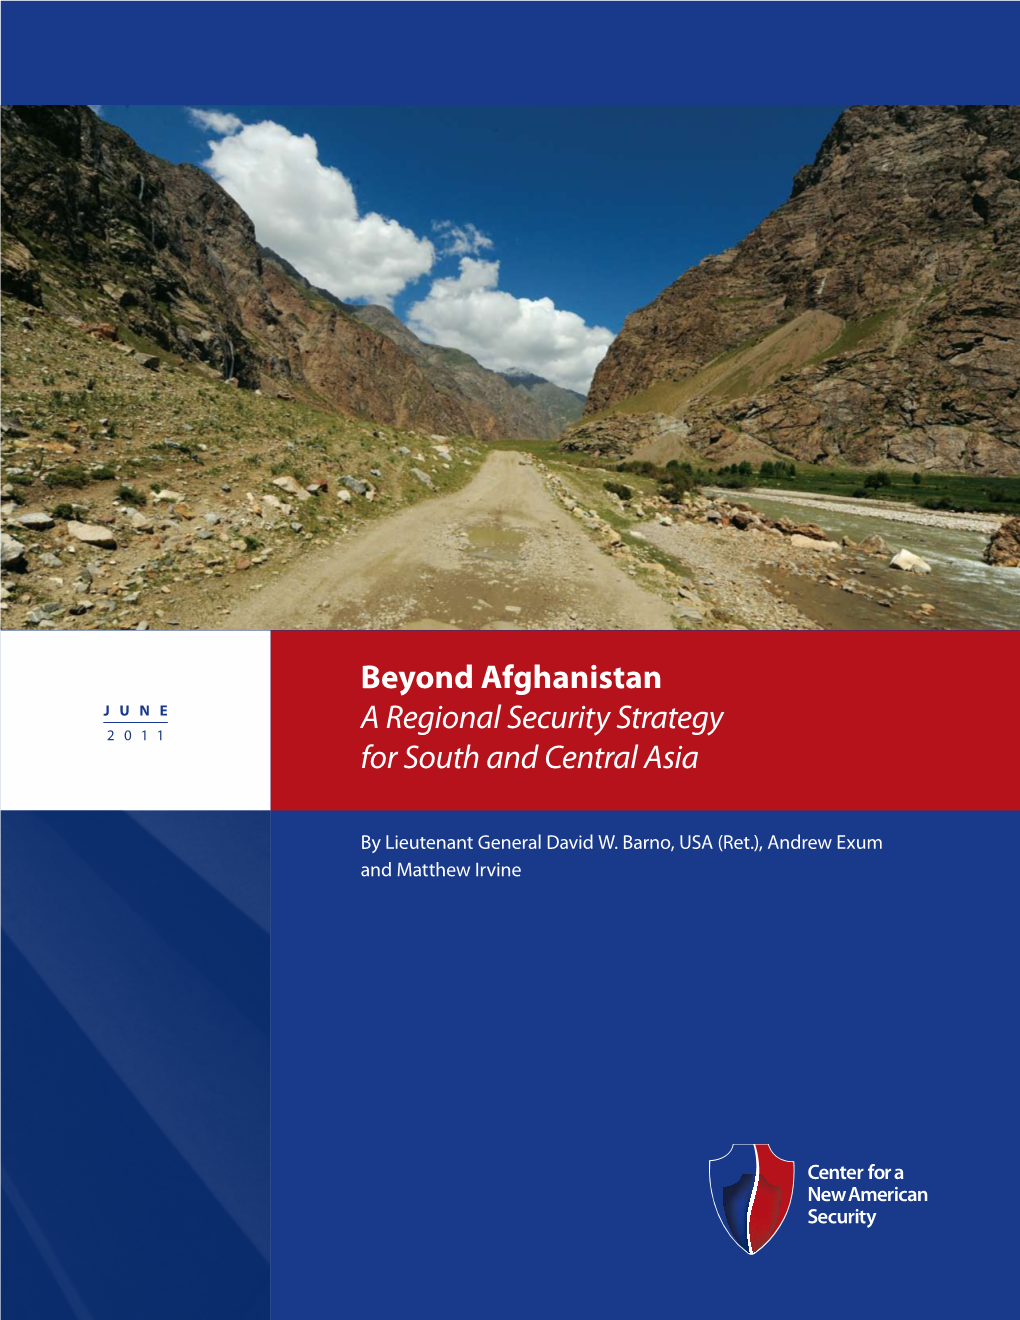 Beyond Afghanistan JUNE 2011 a Regional Security Strategy for South and Central Asia